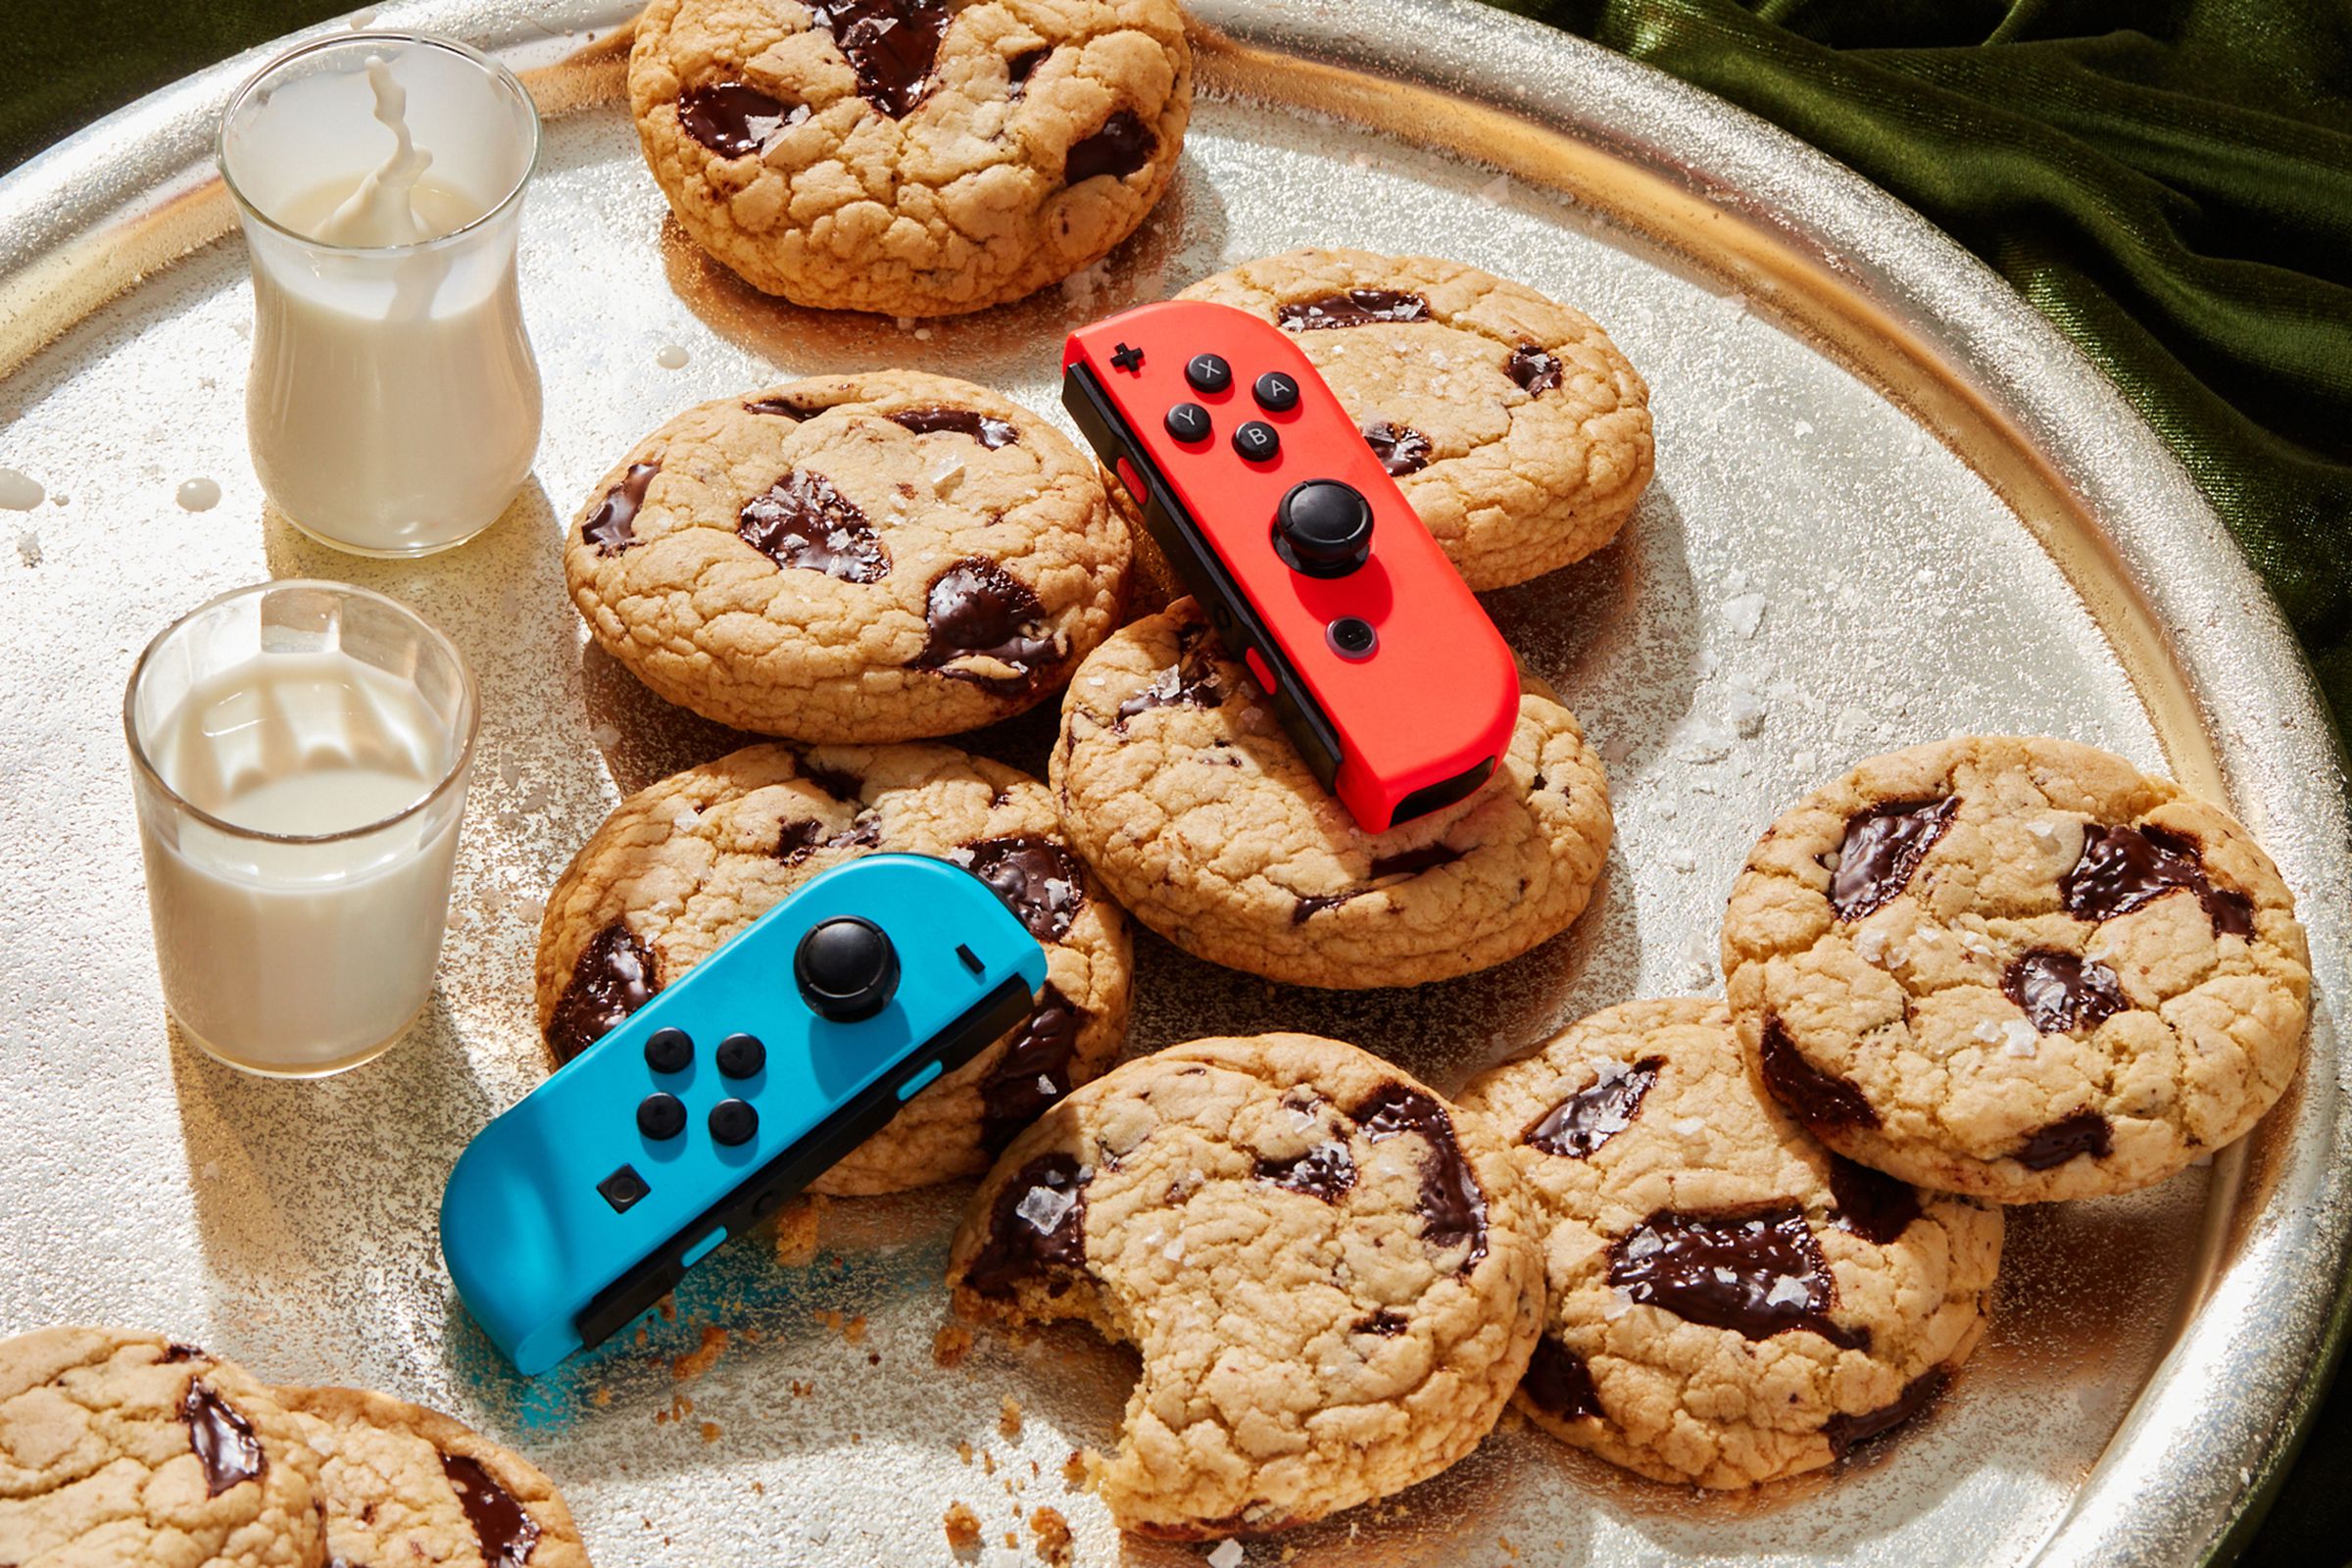 Nintendo Switch Joy-Con controllers on a tray of milk and cookies